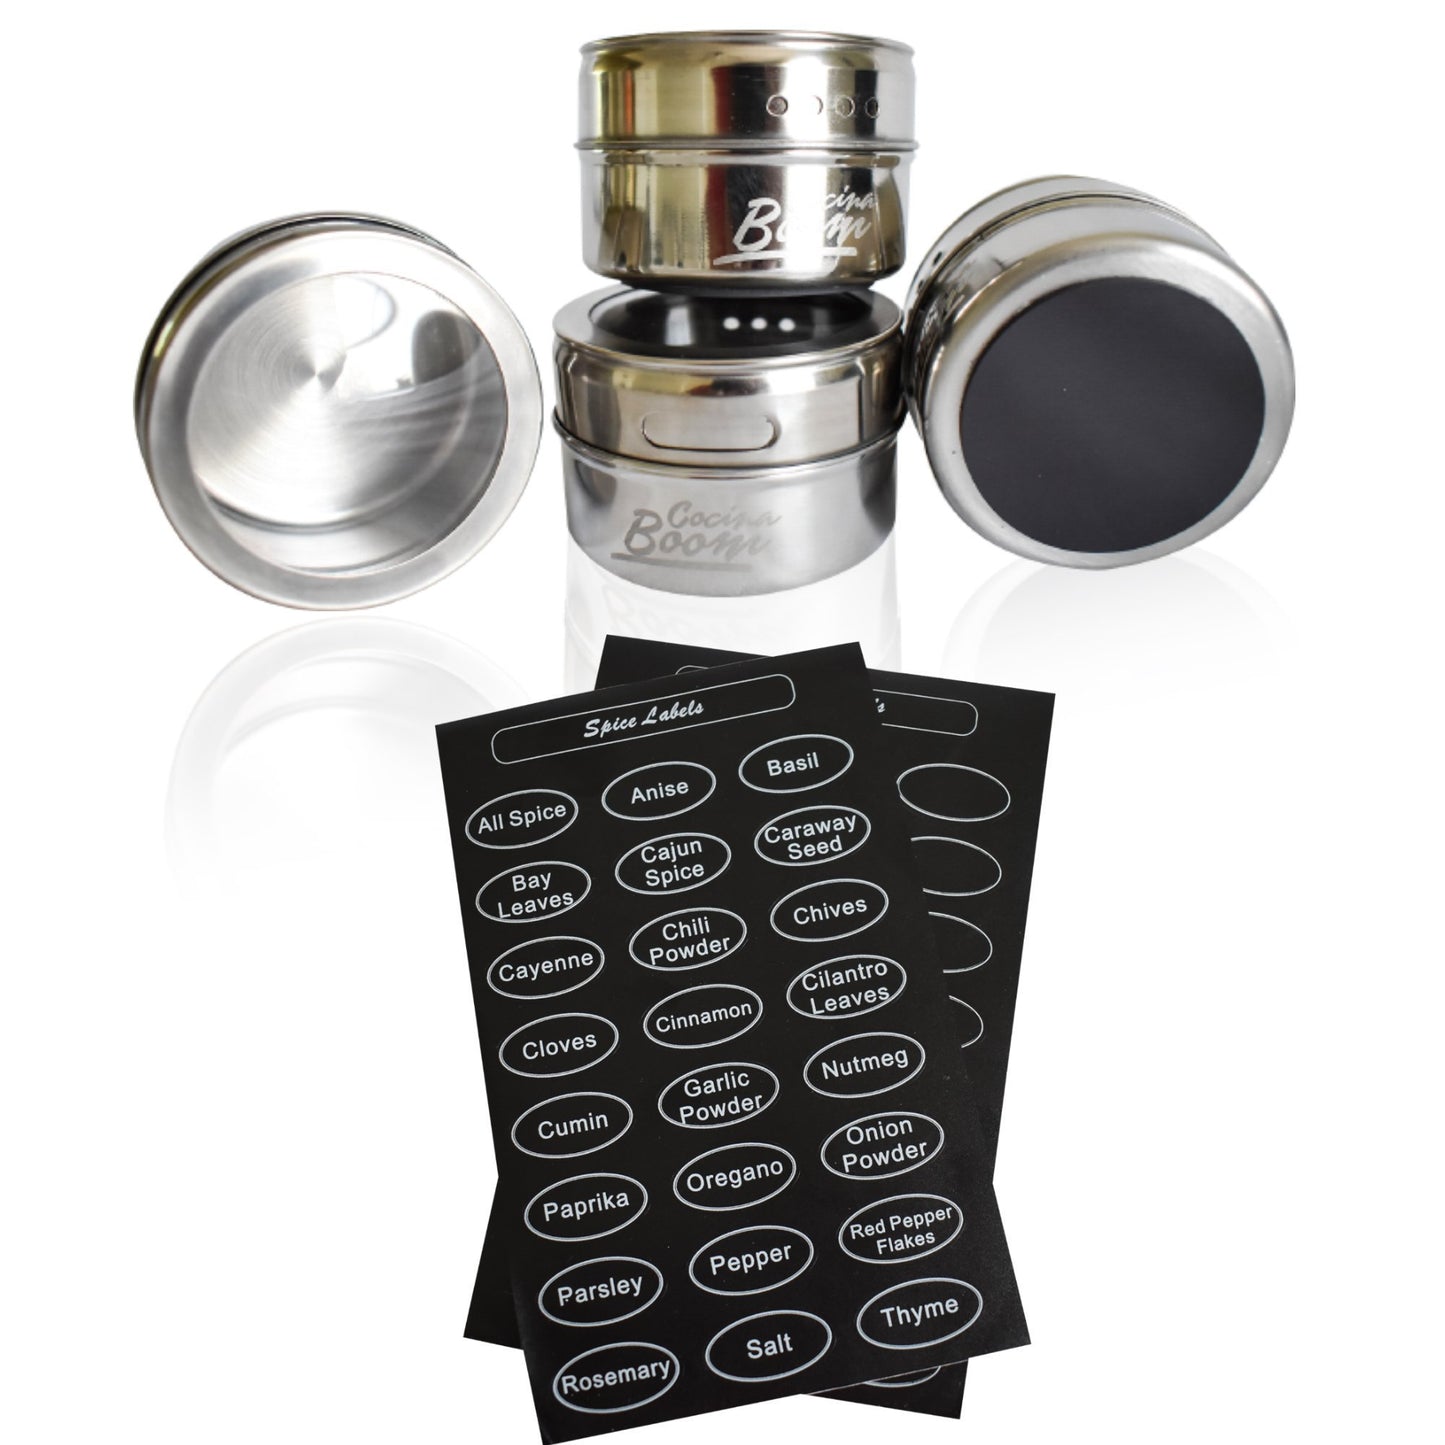 Top 12 magnetic spice tins magnetic spice containers stainless steel for refrigerator and small kitchens spice container organizers spice jars organizer set of 12